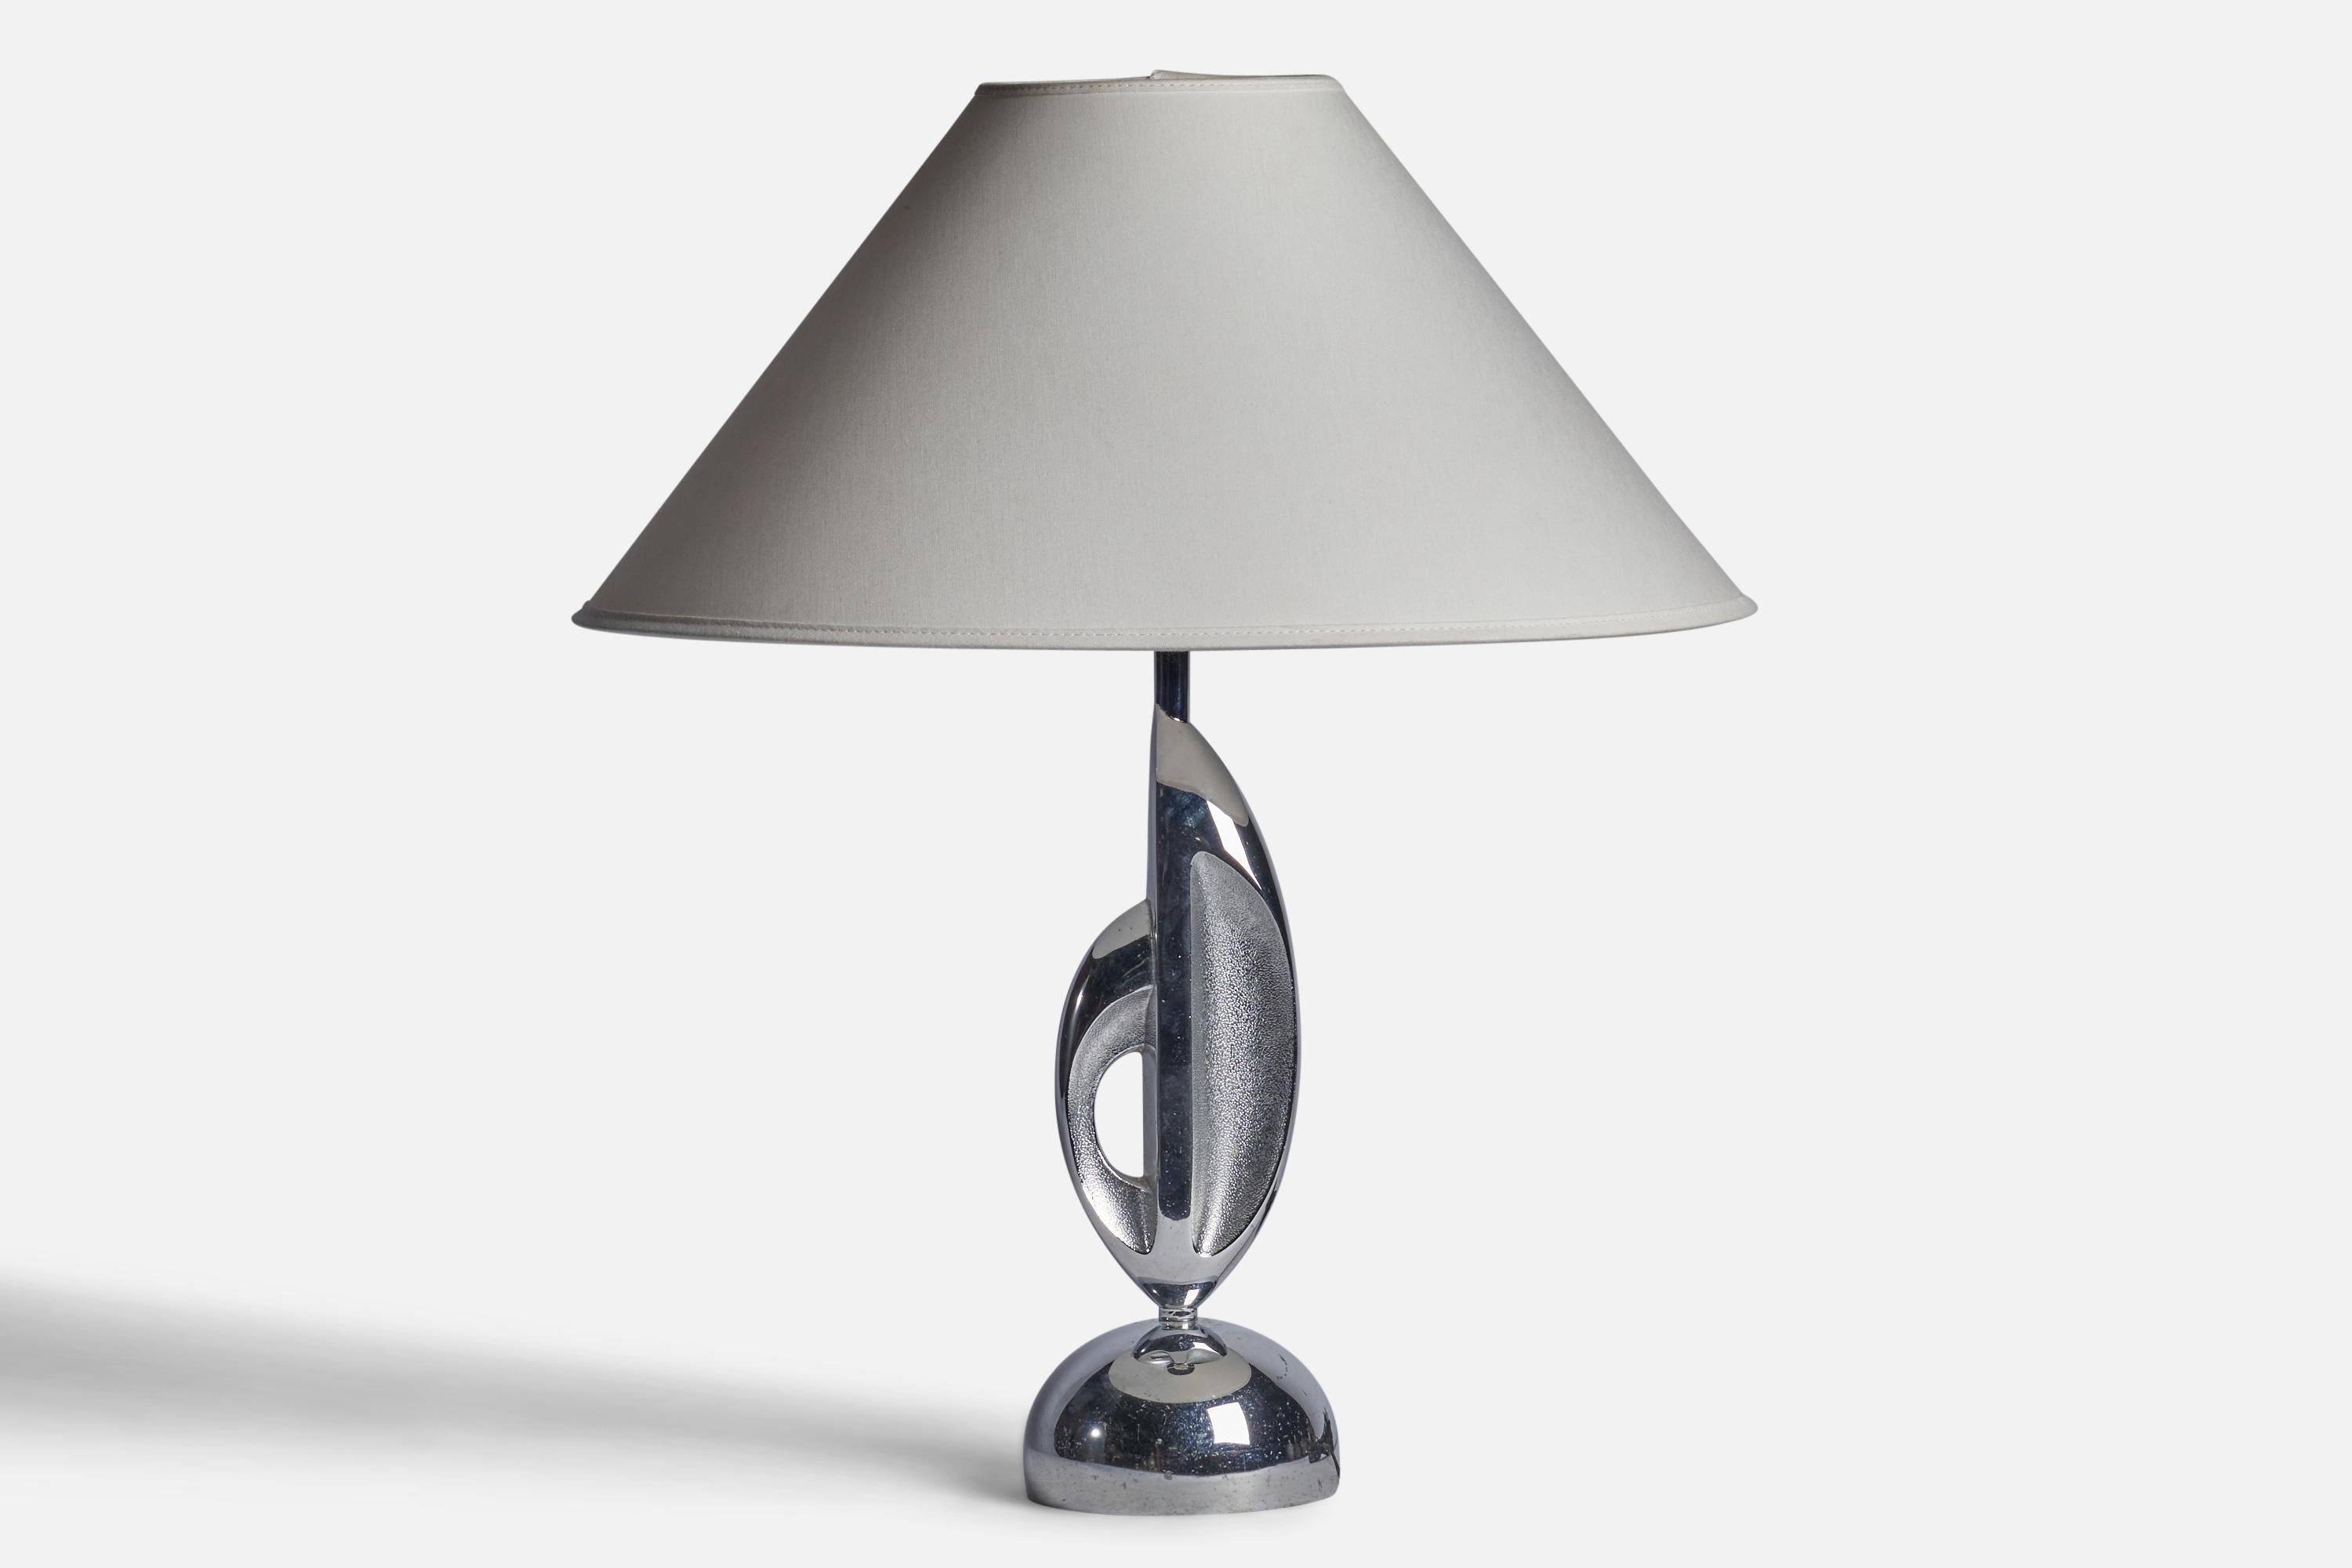 A chrome metal table lamp designed and produced in the US, c. 1930s.

Dimensions of Lamp (inches): 14.5” H x 4.25” Diameter
Dimensions of Shade (inches): 4.5” Top Diameter x 15.75” Bottom Diameter x 9” H
Dimensions of Lamp with Shade (inches): 19.5”